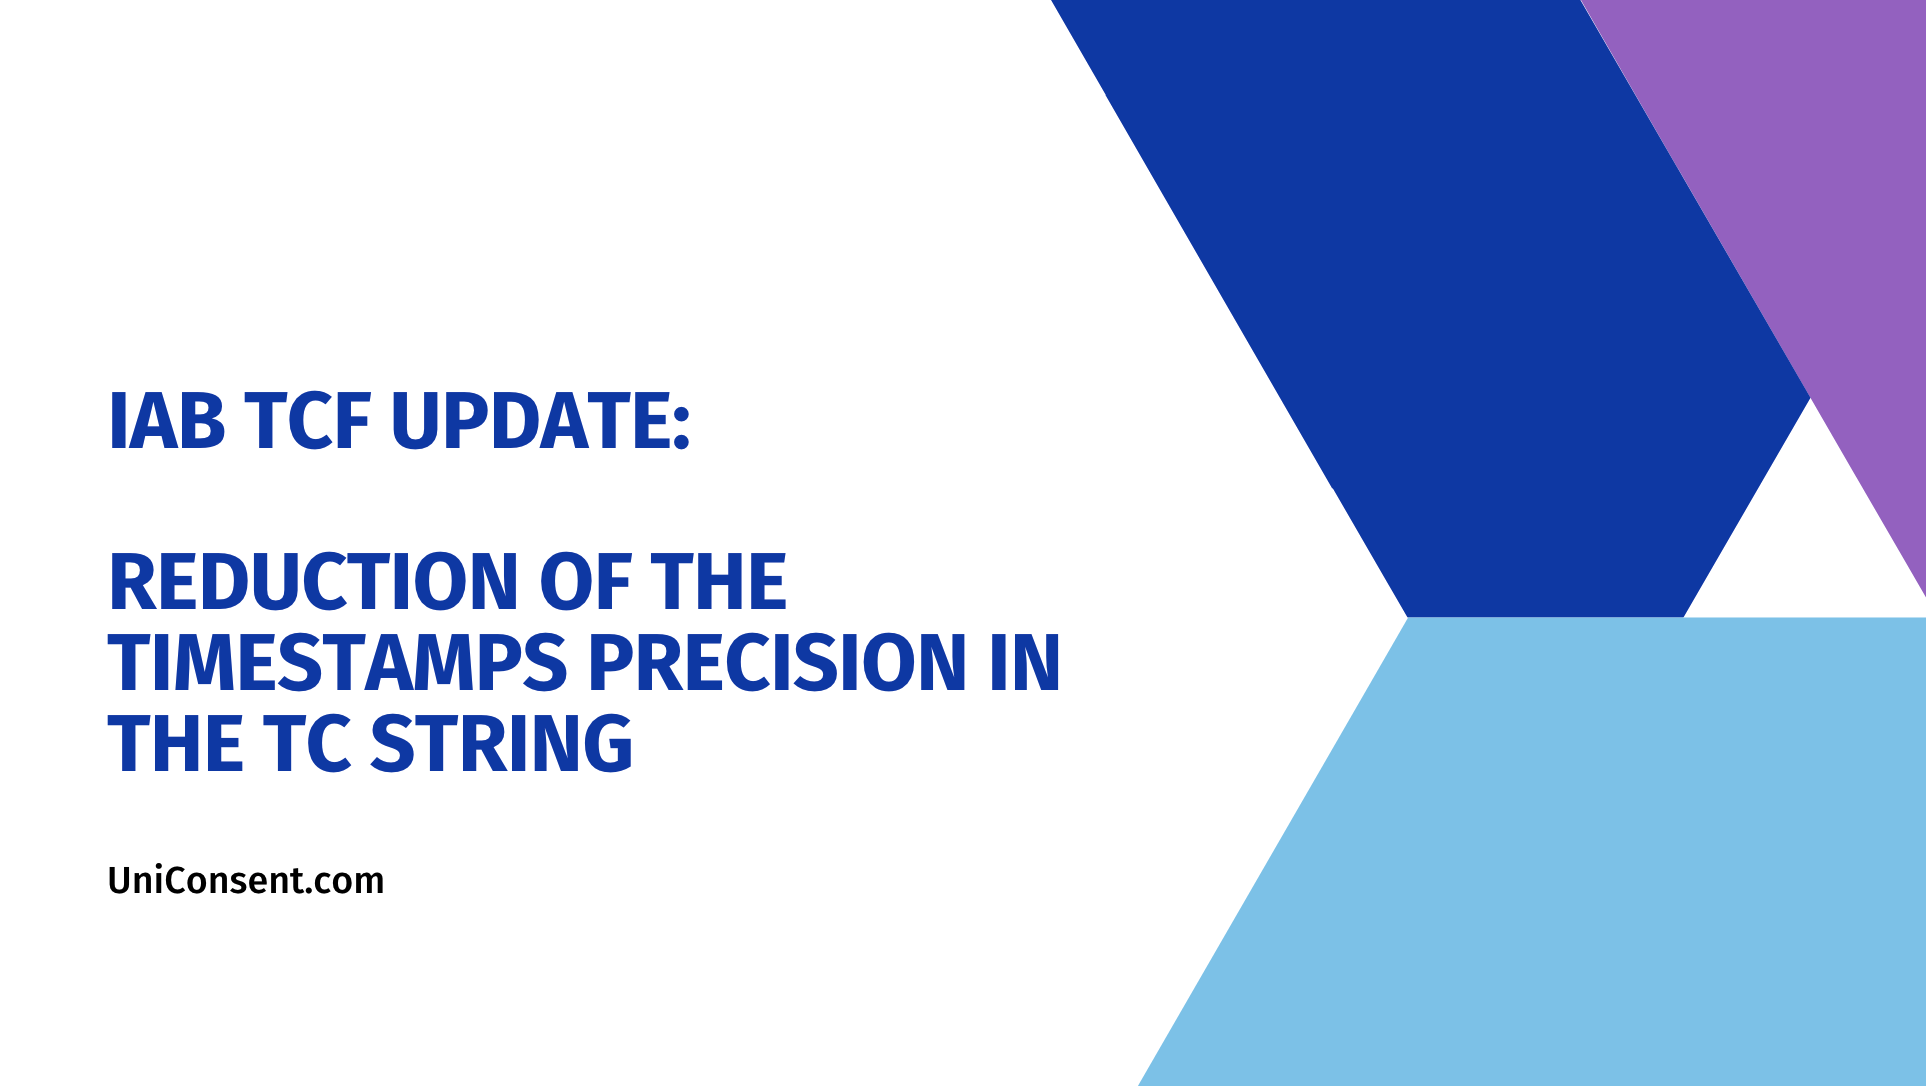 IAB TCF Update, Reduction of the timestamps precision in the TC String